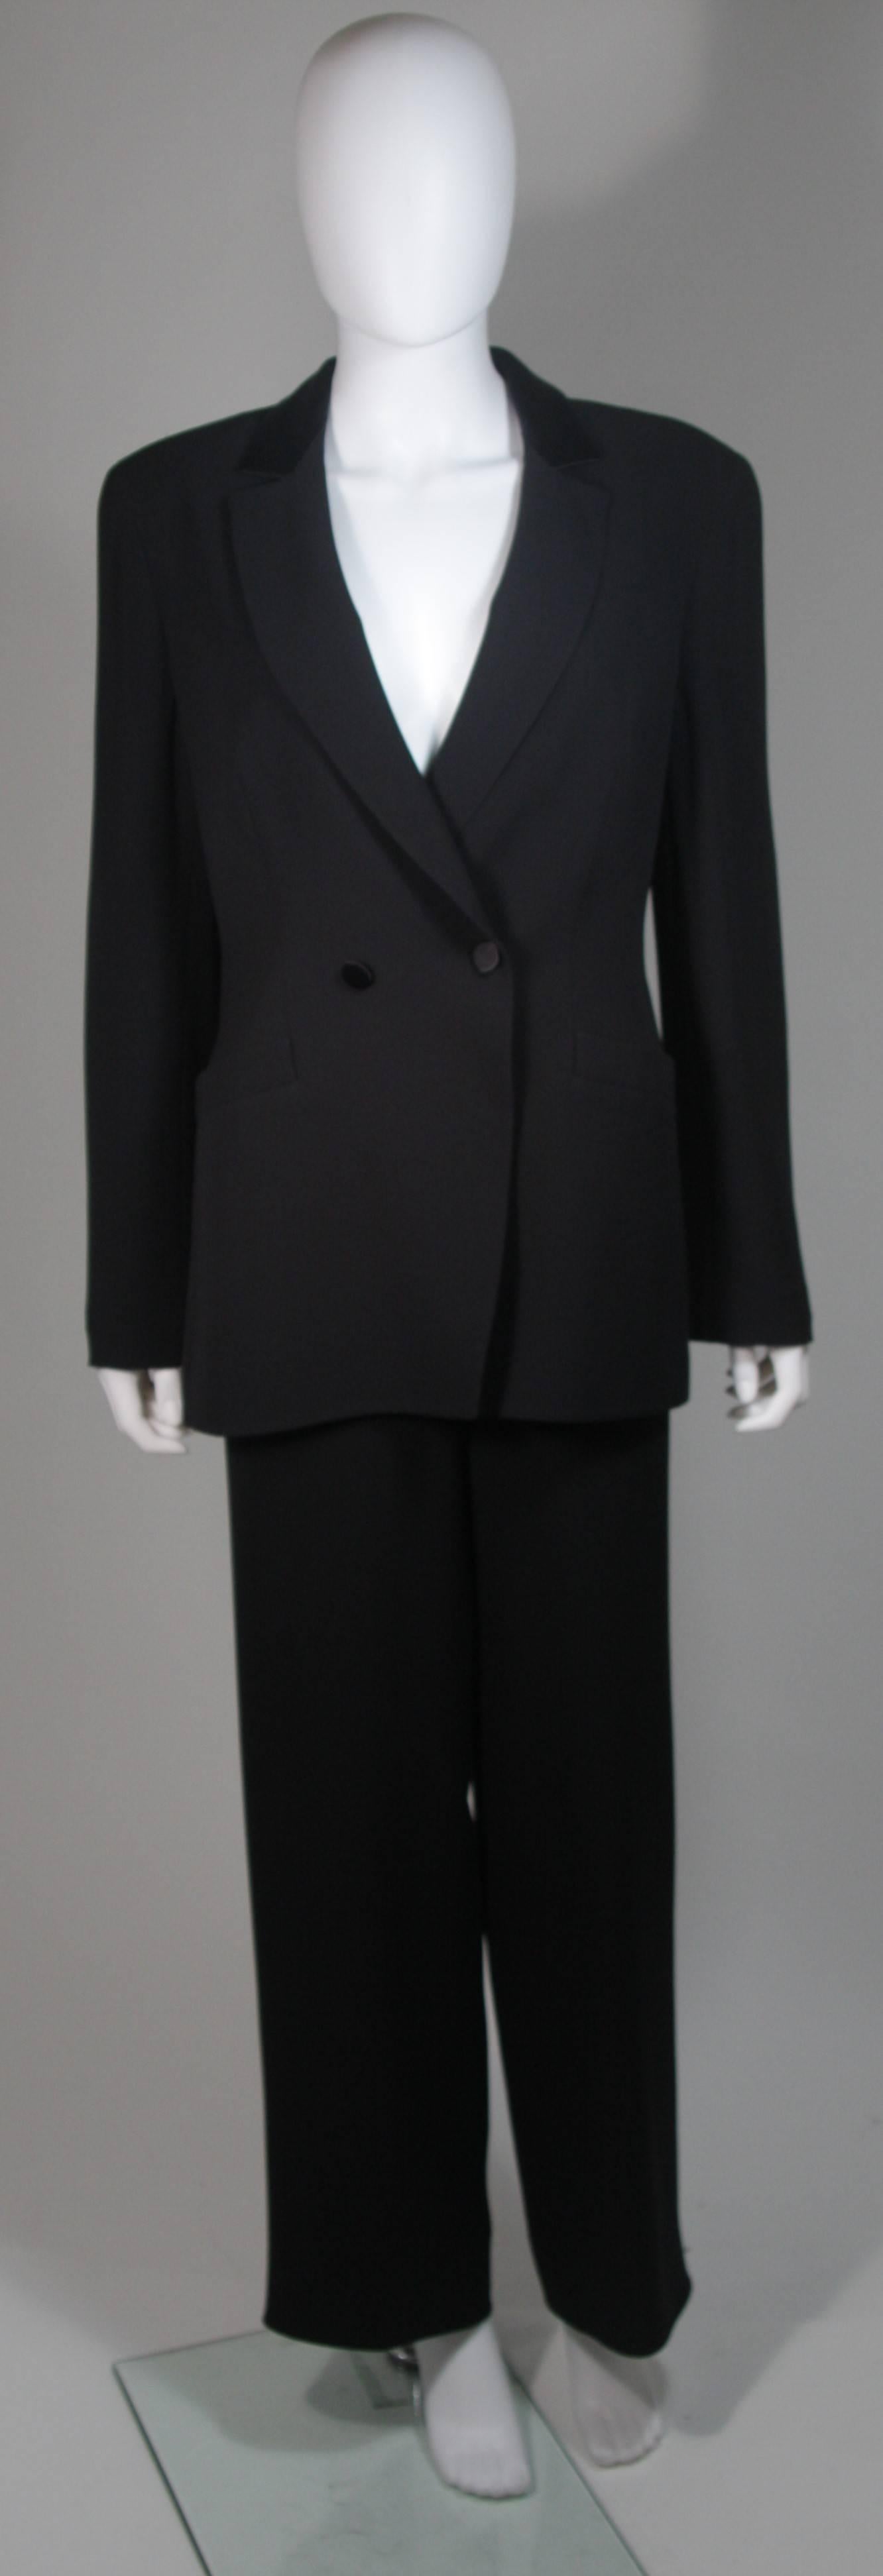 This Giorgio Armani  pant suit is composed of black silk. The jacket features a classic tuxedo style with center front double button detail and silk collar accent. The pants feature a side zip closure. In excellent condition. Made in Italy.

 